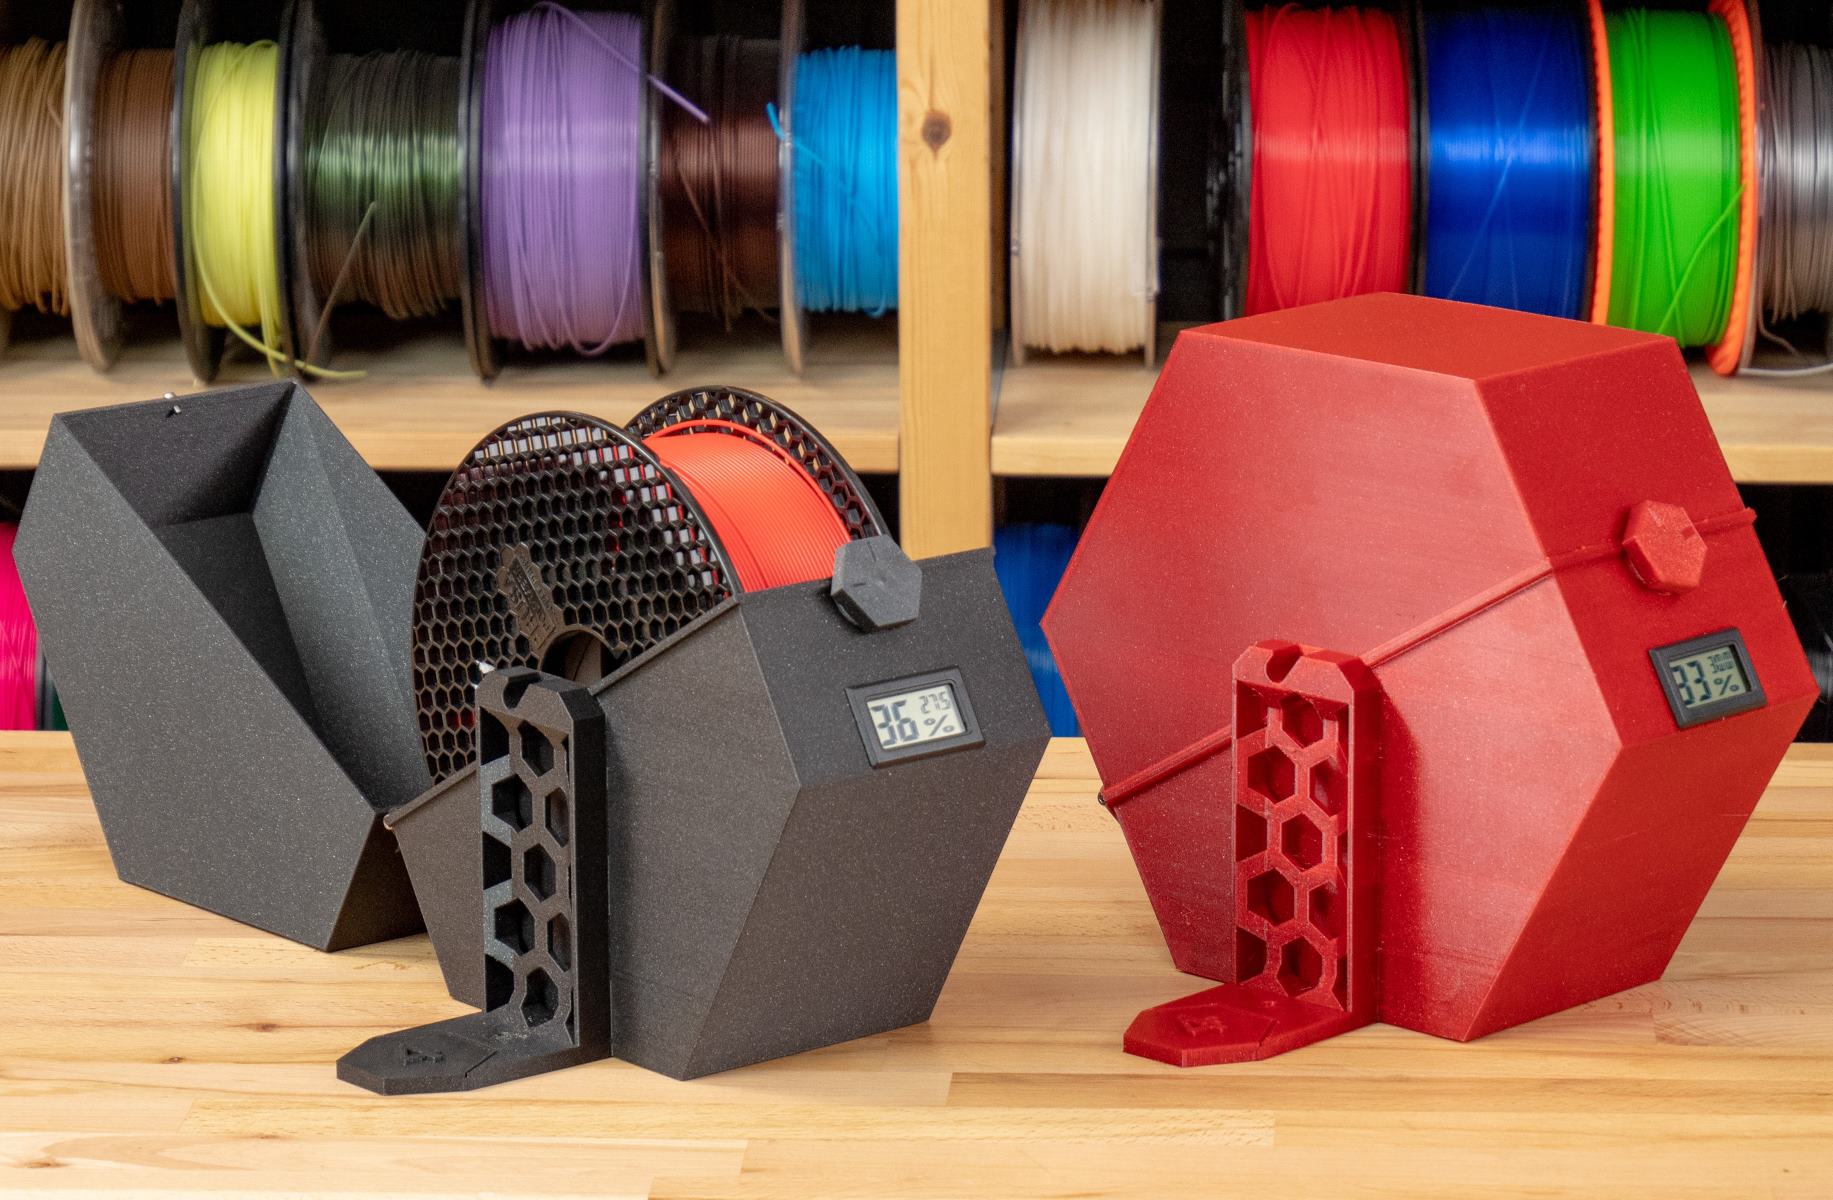 How To Dry 3D Printer Filament